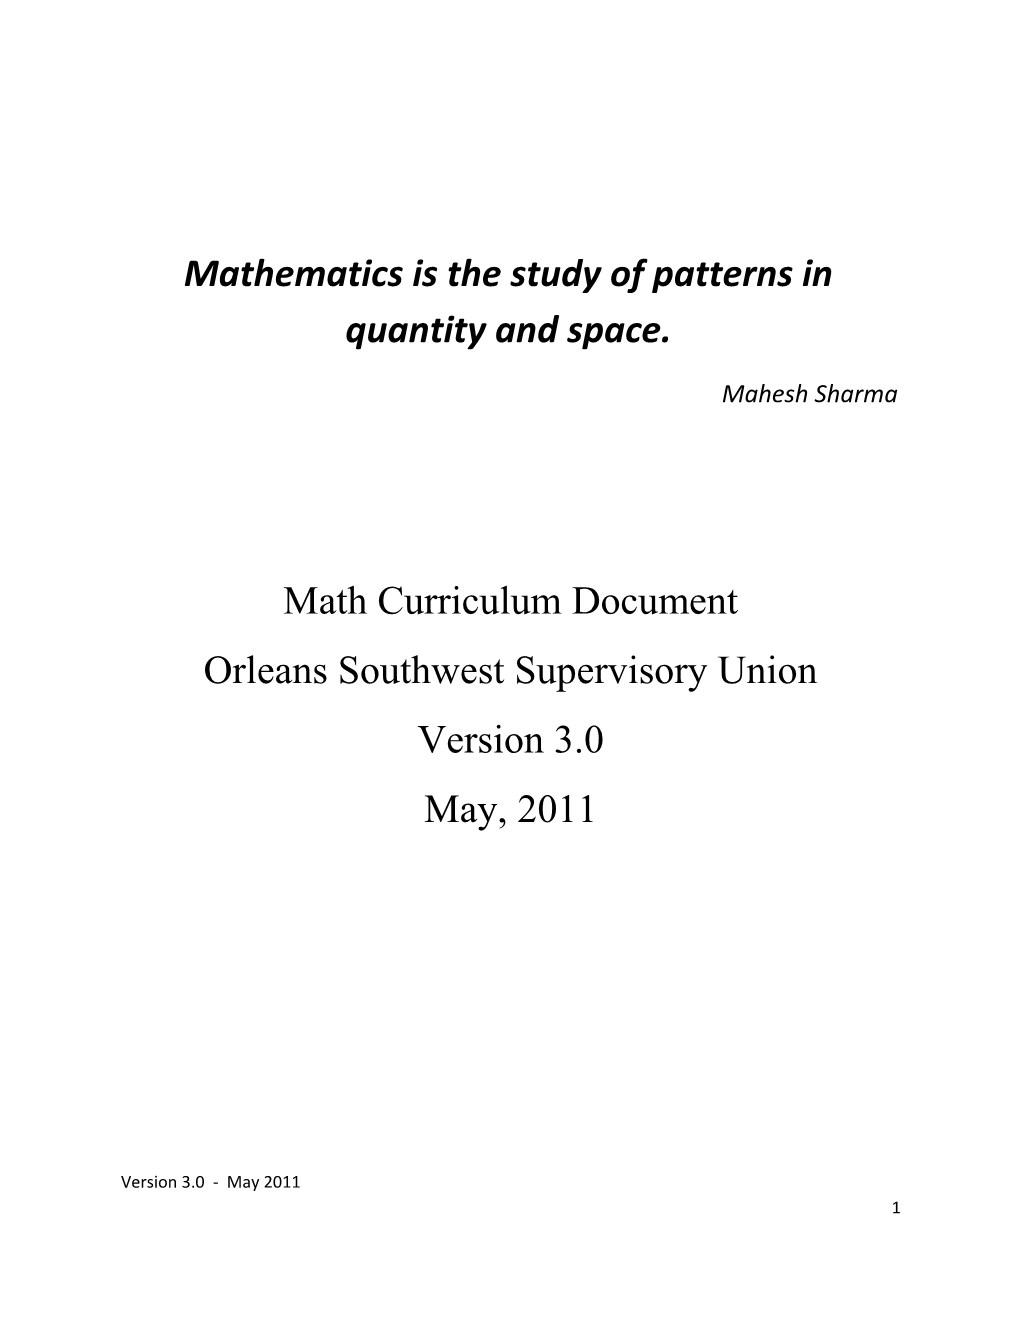 Mathematics Is the Study of Patterns in Quantity and Space